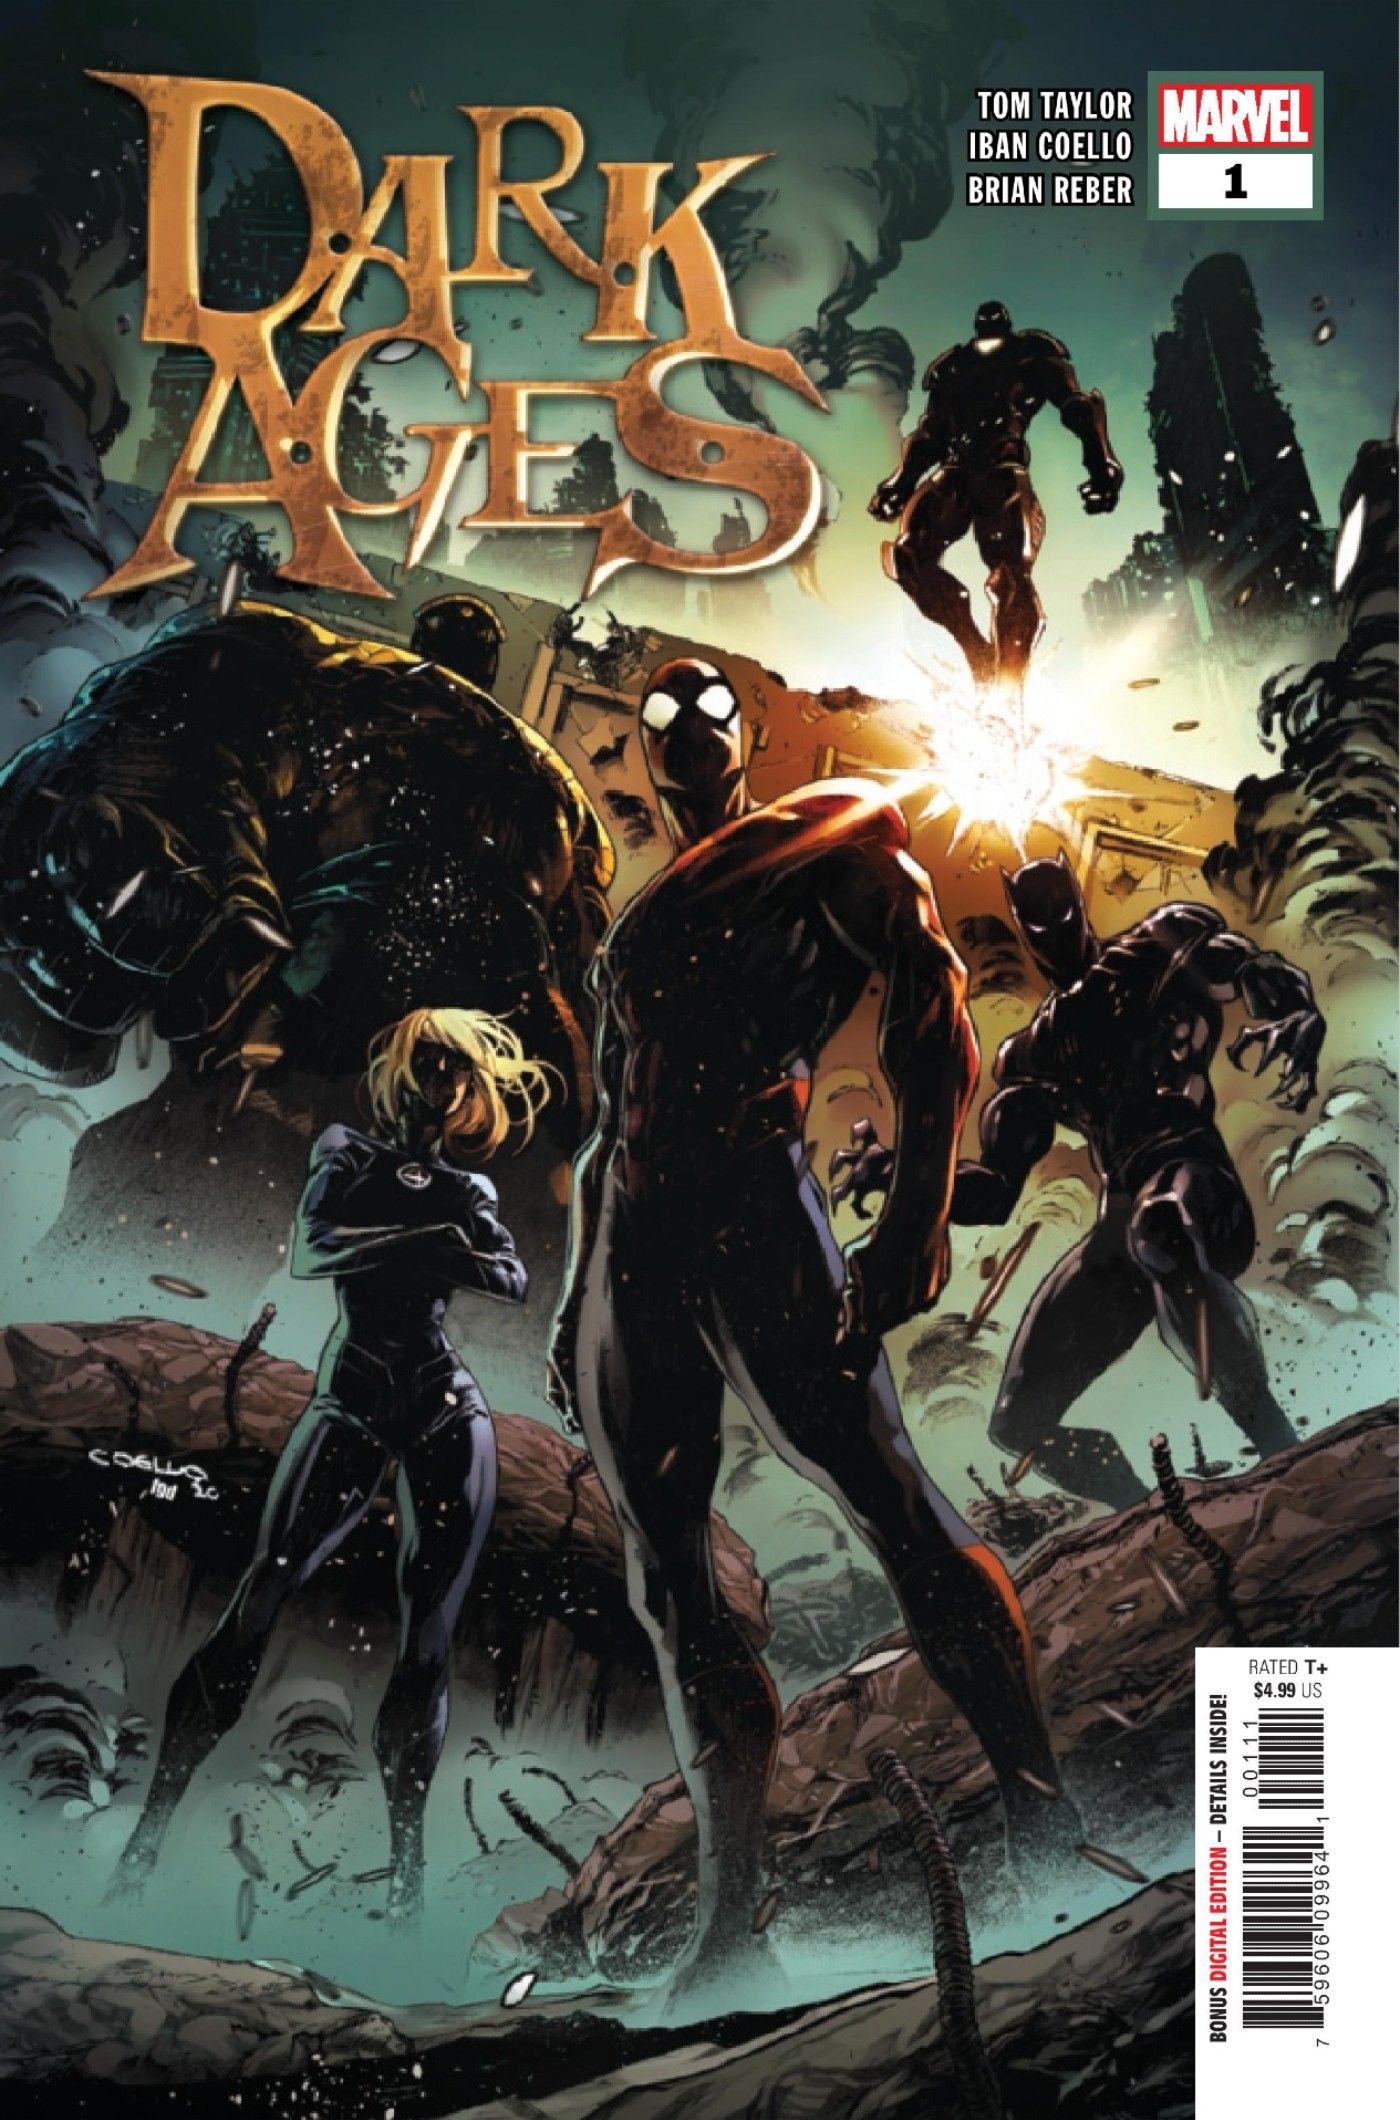 Dark Ages Begins as Spider-Man and the X-Men Discover an Ancient Evil